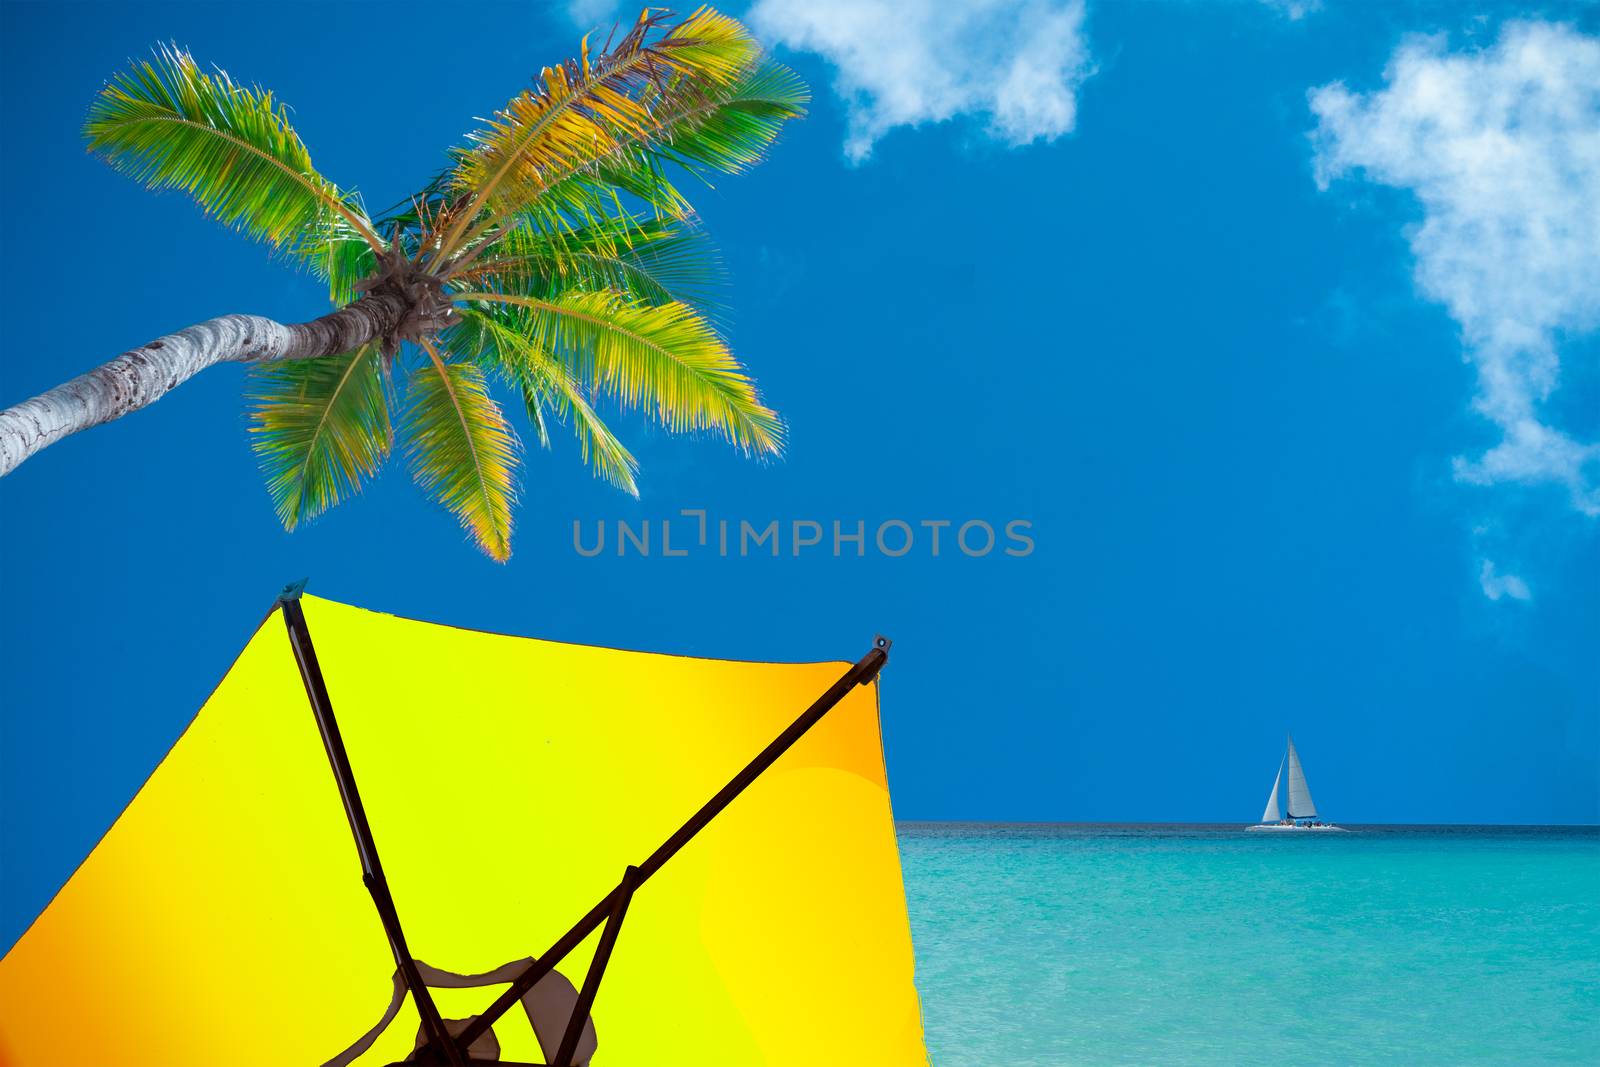 An umbrella under a palm tree and a sailboat on the horizon, a collage on the theme of relaxation by the sea

